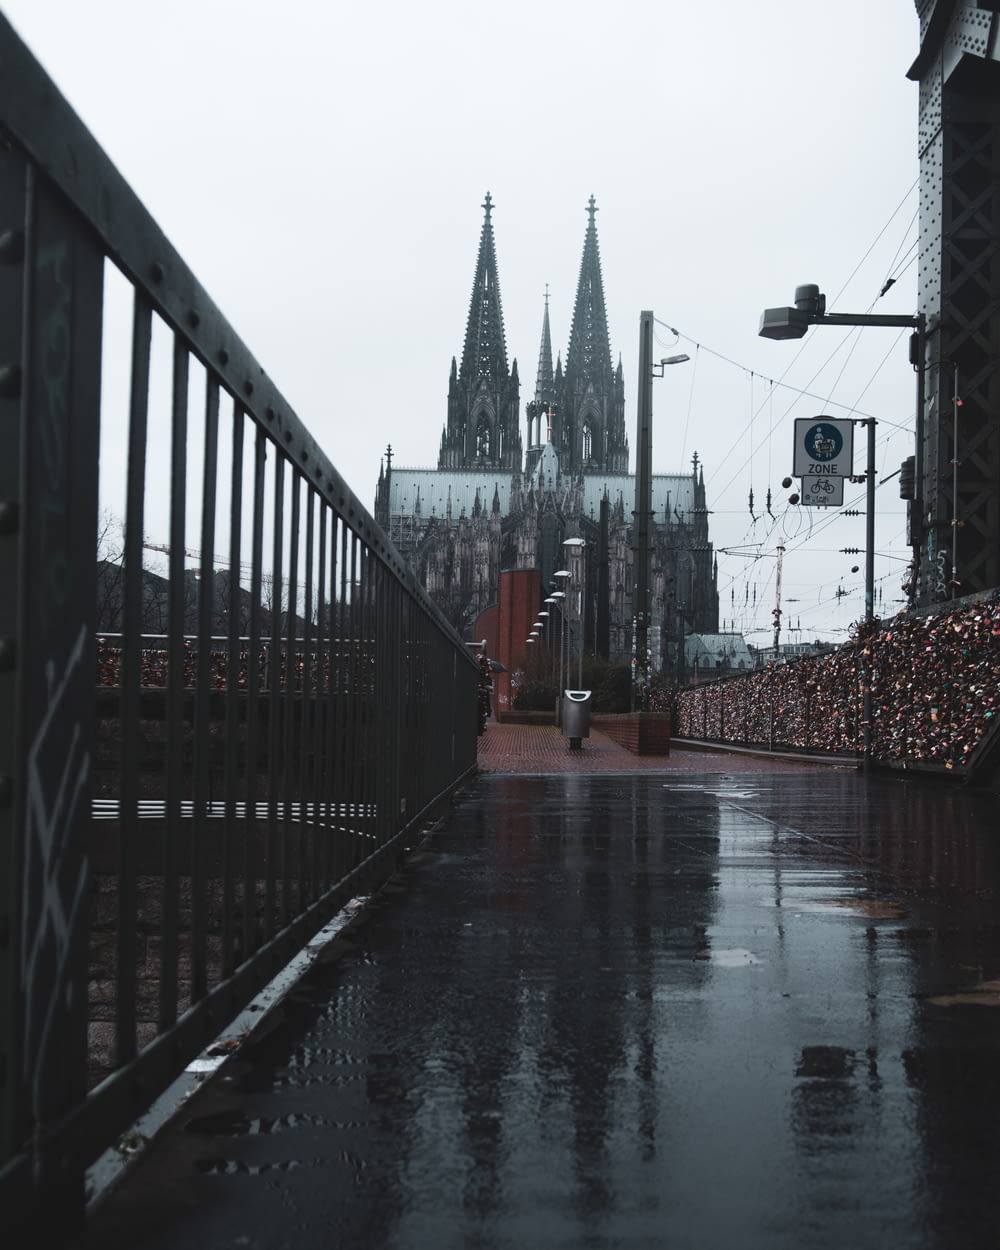 a large cathedral towering over a city on a rainy day